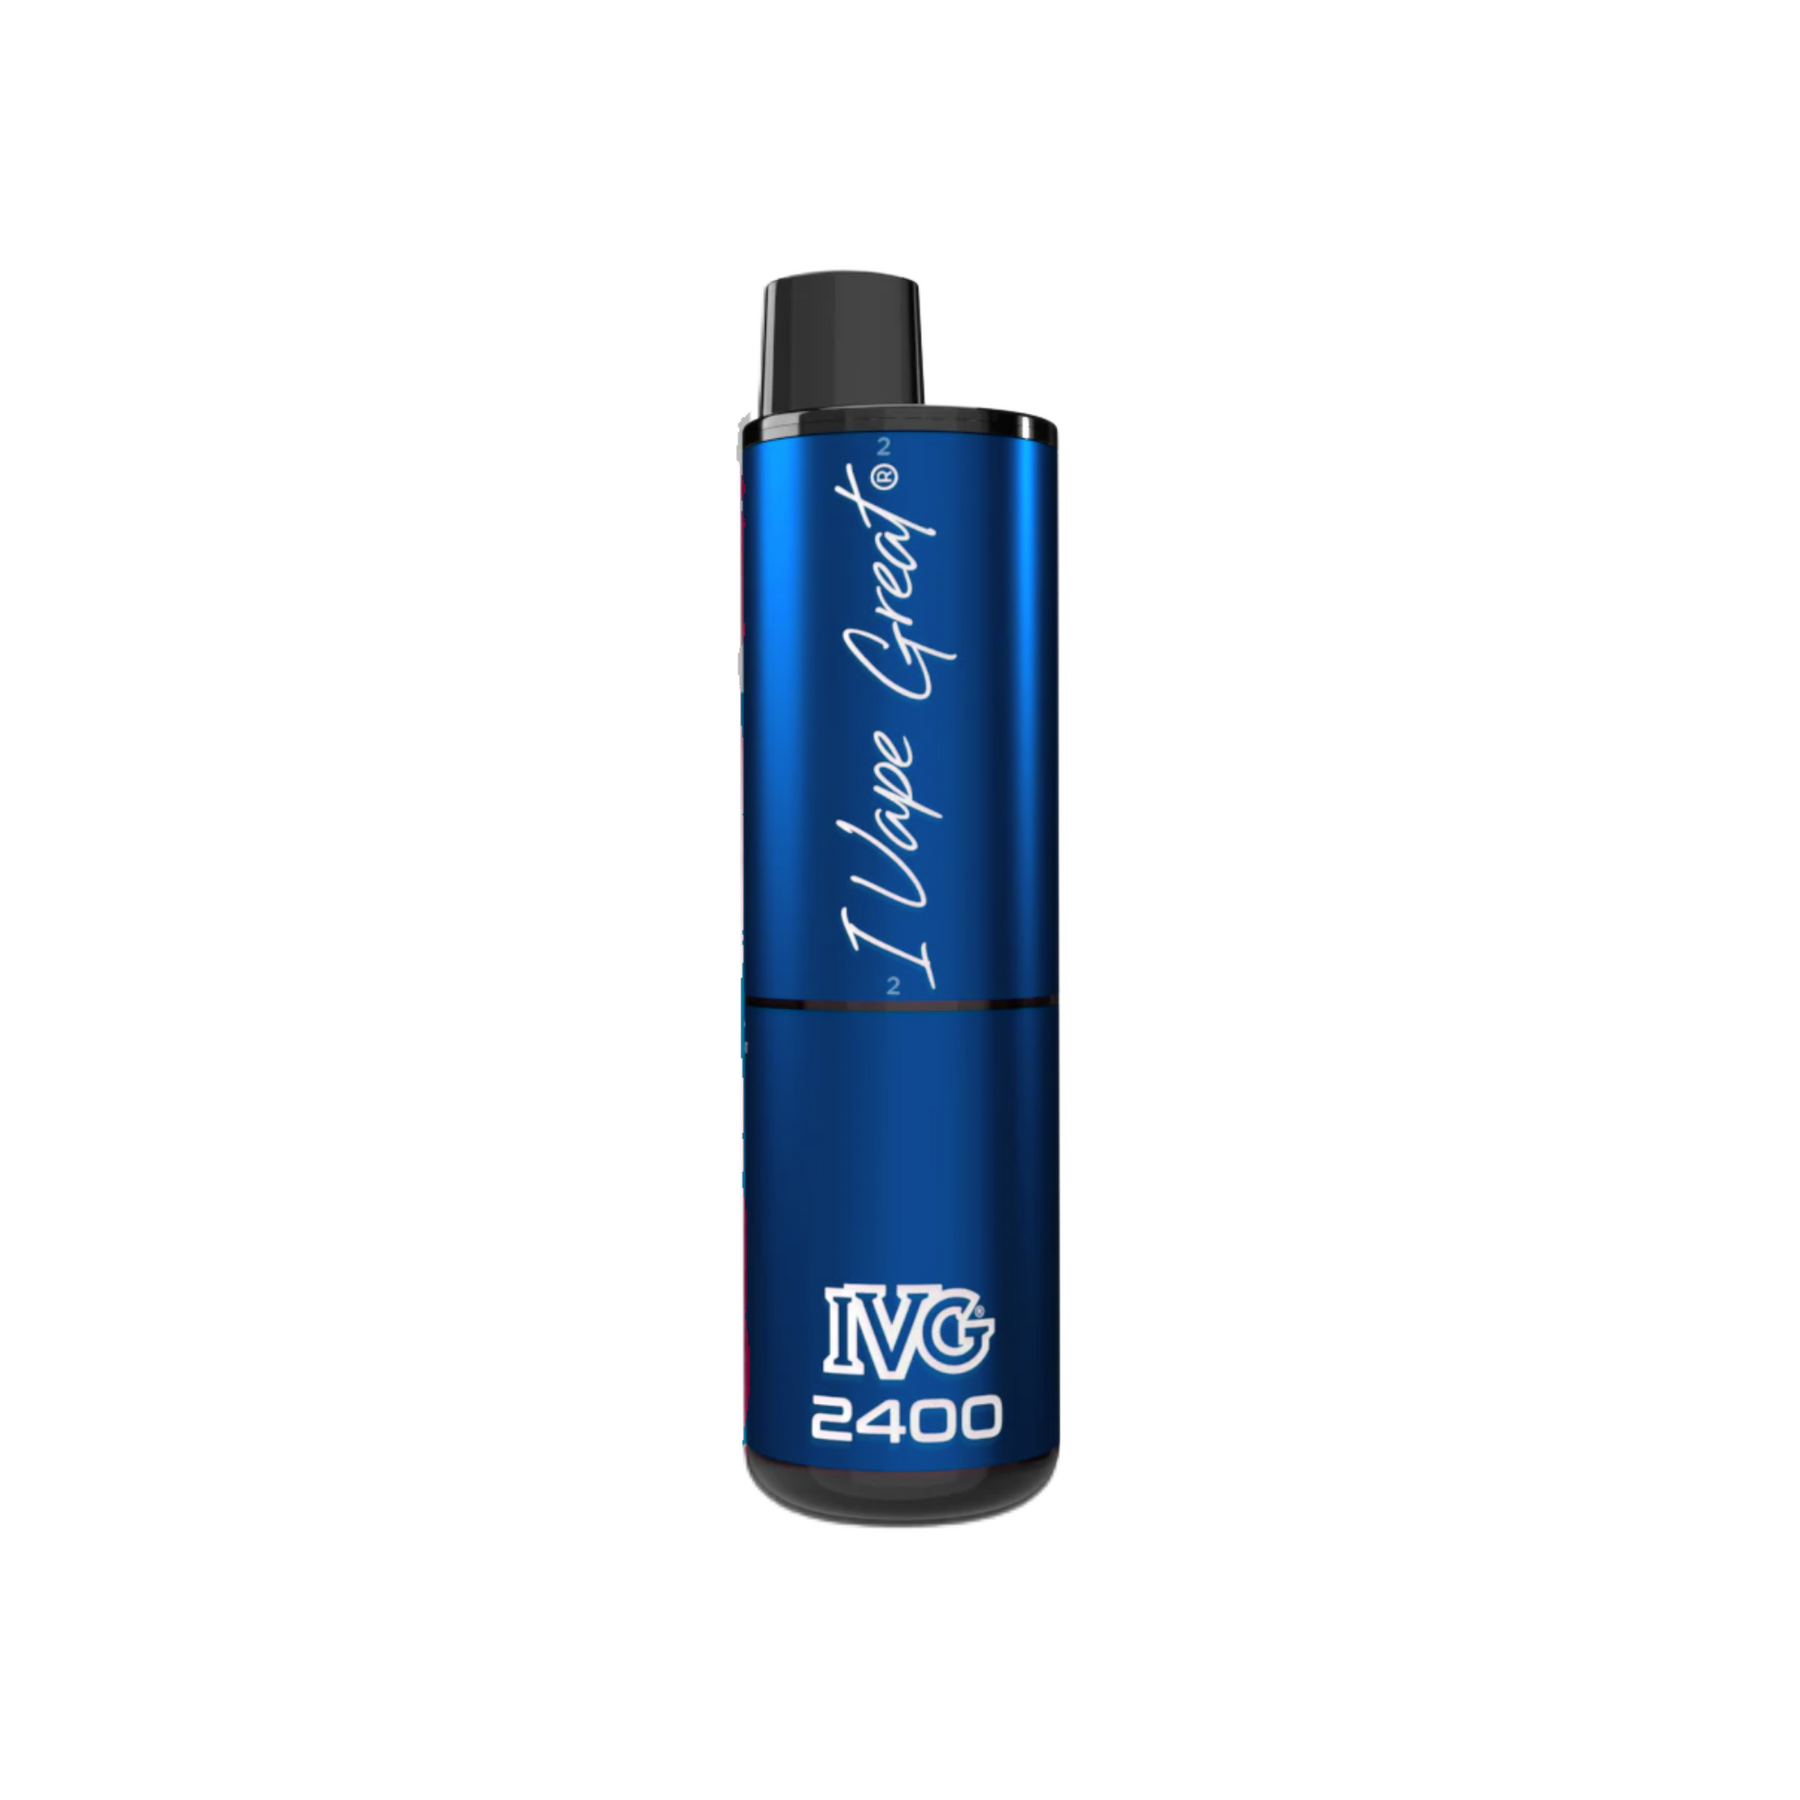 IVG 2400 puff - MULTI BLUE Edition 4 in 1